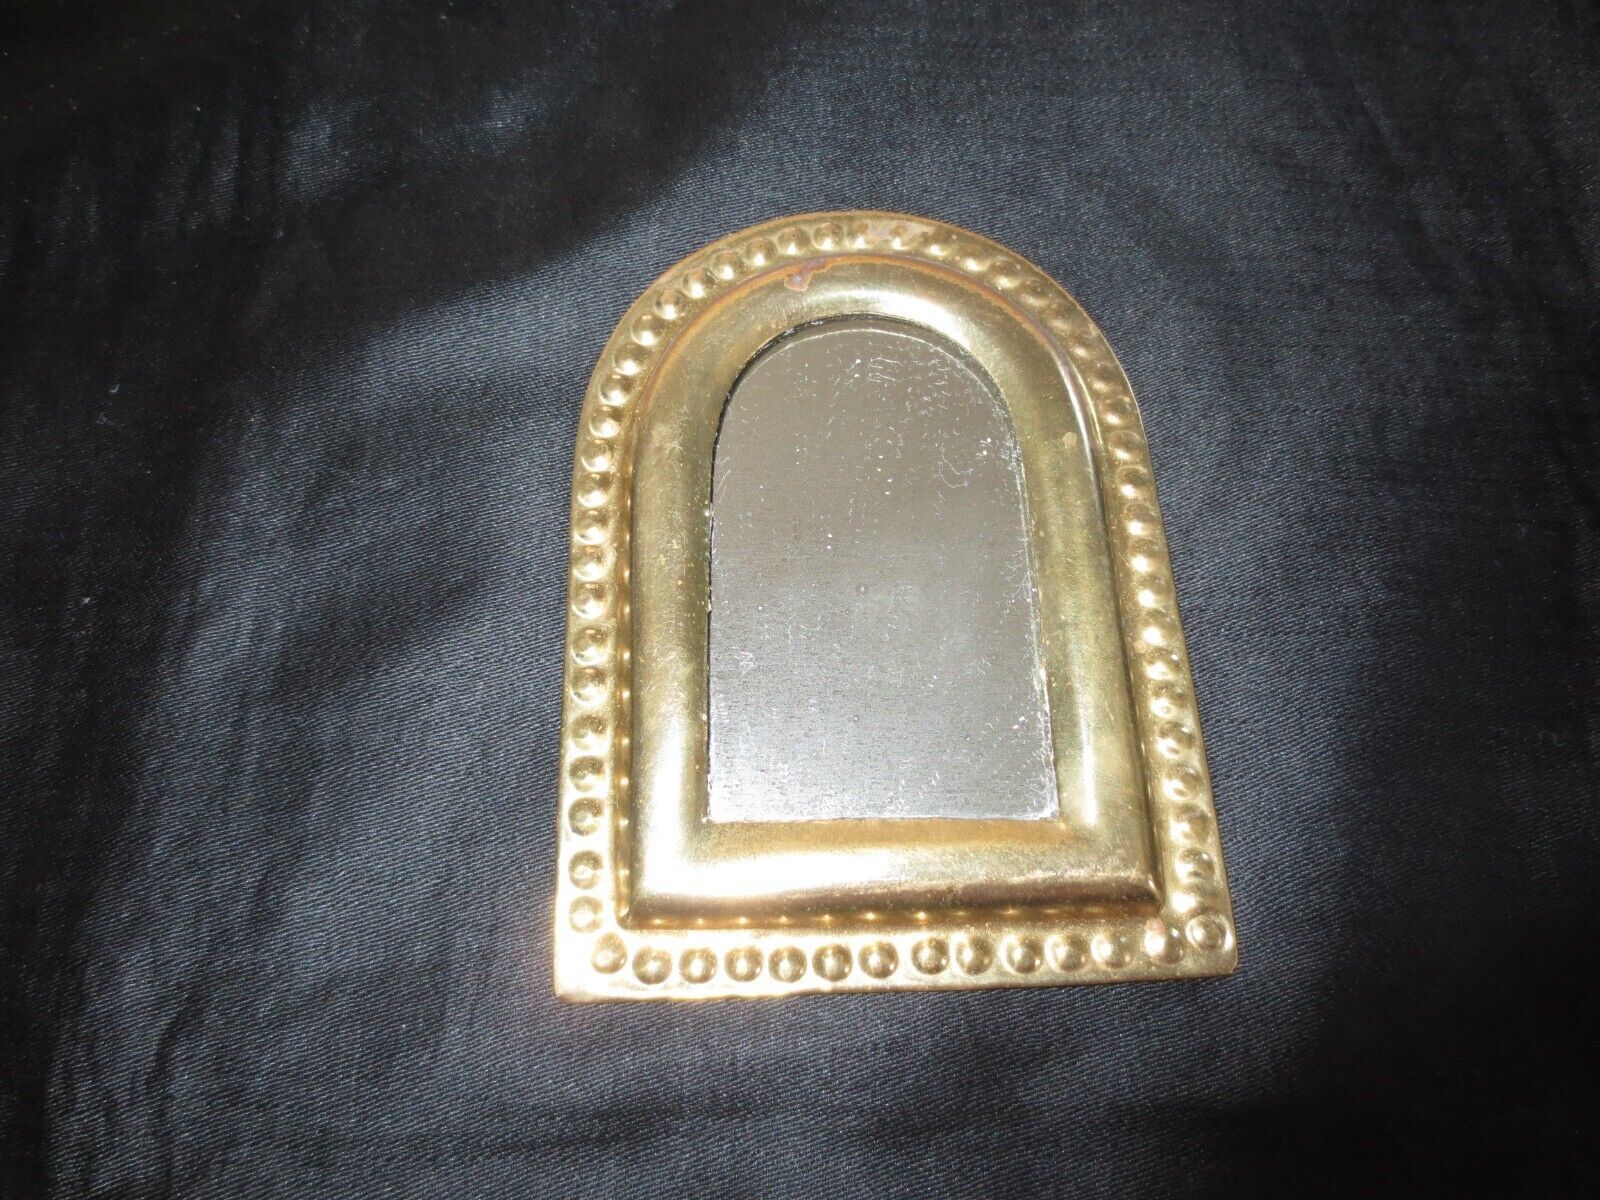 4" Solid Brass MIRROR WALL PLAQUE - Actual 3-1/8" x 4-1/4" - Made in India - $12.00